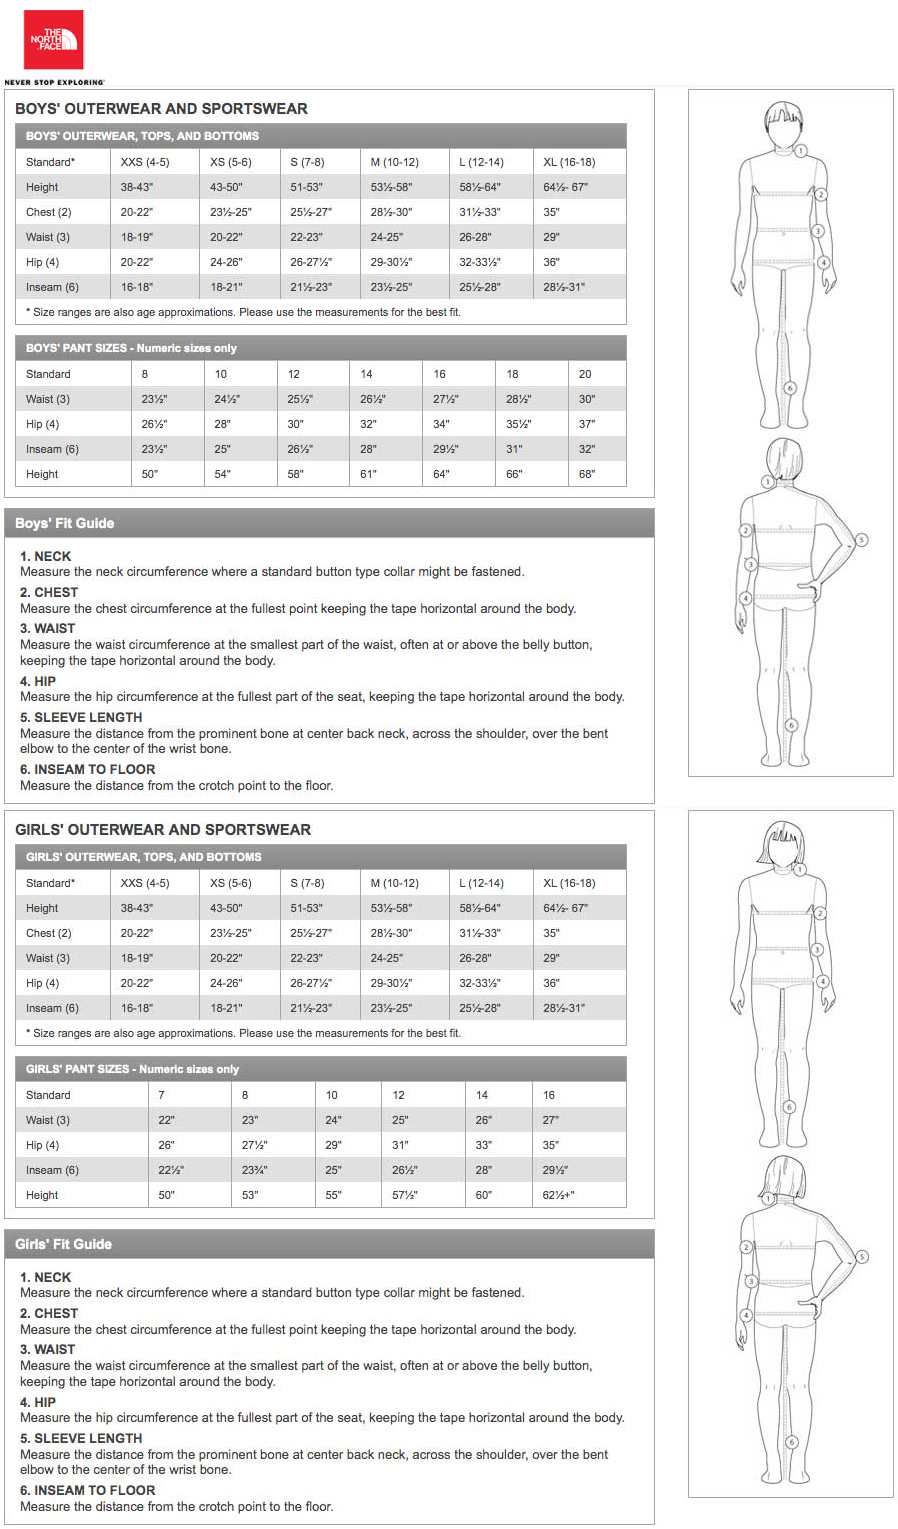 north face snow pants size chart Online 